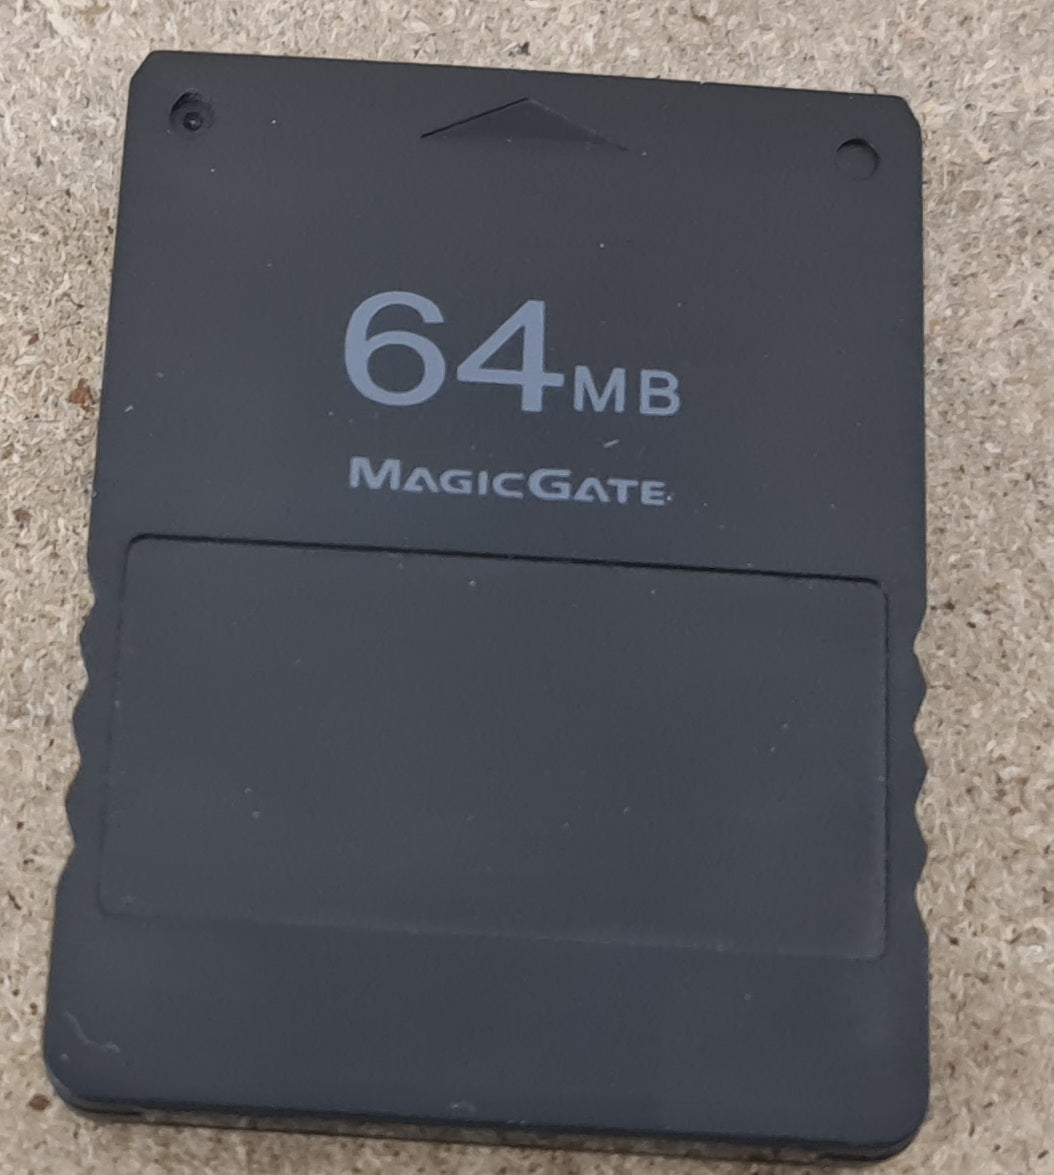 MagicGate 64 MB Memory Card Sony Playstation 2 (PS2) Accessory